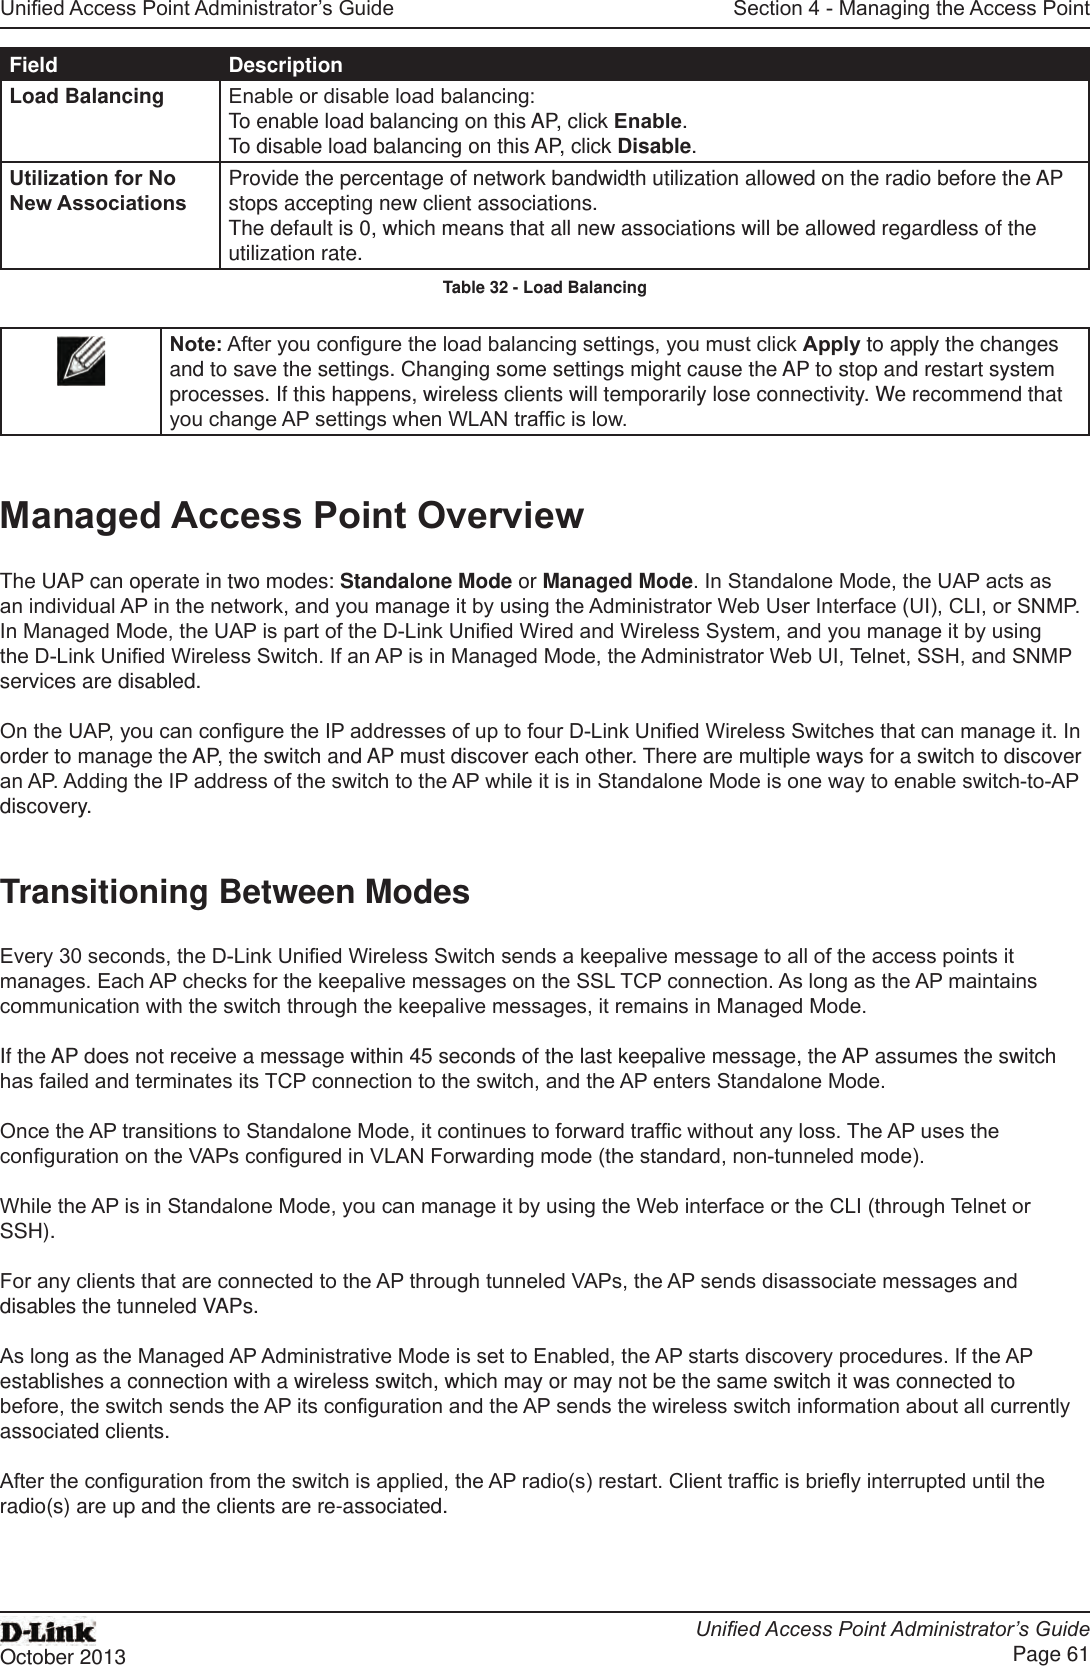 Unied Access Point Administrator’s GuideUnied Access Point Administrator’s GuidePage 61October 2013Section 4 - Managing the Access PointField DescriptionLoad Balancing Enable or disable load balancing:To enable load balancing on this AP, click Enable.To disable load balancing on this AP, click Disable.Utilization for No New AssociationsProvide the percentage of network bandwidth utilization allowed on the radio before the AP stops accepting new client associations. The default is 0, which means that all new associations will be allowed regardless of the utilization rate.Table 32 - Load BalancingNote: After you congure the load balancing settings, you must click Apply to apply the changes and to save the settings. Changing some settings might cause the AP to stop and restart system processes. If this happens, wireless clients will temporarily lose connectivity. We recommend that you change AP settings when WLAN trafc is low. Managed Access Point OverviewThe UAP can operate in two modes: Standalone Mode or Managed Mode. In Standalone Mode, the UAP acts as an individual AP in the network, and you manage it by using the Administrator Web User Interface (UI), CLI, or SNMP. In Managed Mode, the UAP is part of the D-Link Unied Wired and Wireless System, and you manage it by using the D-Link Unied Wireless Switch. If an AP is in Managed Mode, the Administrator Web UI, Telnet, SSH, and SNMP services are disabled.On the UAP, you can congure the IP addresses of up to four D-Link Unied Wireless Switches that can manage it. In order to manage the AP, the switch and AP must discover each other. There are multiple ways for a switch to discover an AP. Adding the IP address of the switch to the AP while it is in Standalone Mode is one way to enable switch-to-AP discovery.Transitioning Between ModesEvery 30 seconds, the D-Link Unied Wireless Switch sends a keepalive message to all of the access points it manages. Each AP checks for the keepalive messages on the SSL TCP connection. As long as the AP maintains communication with the switch through the keepalive messages, it remains in Managed Mode.If the AP does not receive a message within 45 seconds of the last keepalive message, the AP assumes the switch has failed and terminates its TCP connection to the switch, and the AP enters Standalone Mode.Once the AP transitions to Standalone Mode, it continues to forward trafc without any loss. The AP uses the conguration on the VAPs congured in VLAN Forwarding mode (the standard, non-tunneled mode).While the AP is in Standalone Mode, you can manage it by using the Web interface or the CLI (through Telnet or SSH).For any clients that are connected to the AP through tunneled VAPs, the AP sends disassociate messages and disables the tunneled VAPs.As long as the Managed AP Administrative Mode is set to Enabled, the AP starts discovery procedures. If the AP establishes a connection with a wireless switch, which may or may not be the same switch it was connected to before, the switch sends the AP its conguration and the AP sends the wireless switch information about all currently associated clients.After the conguration from the switch is applied, the AP radio(s) restart. Client trafc is briey interrupted until the radio(s) are up and the clients are re-associated.